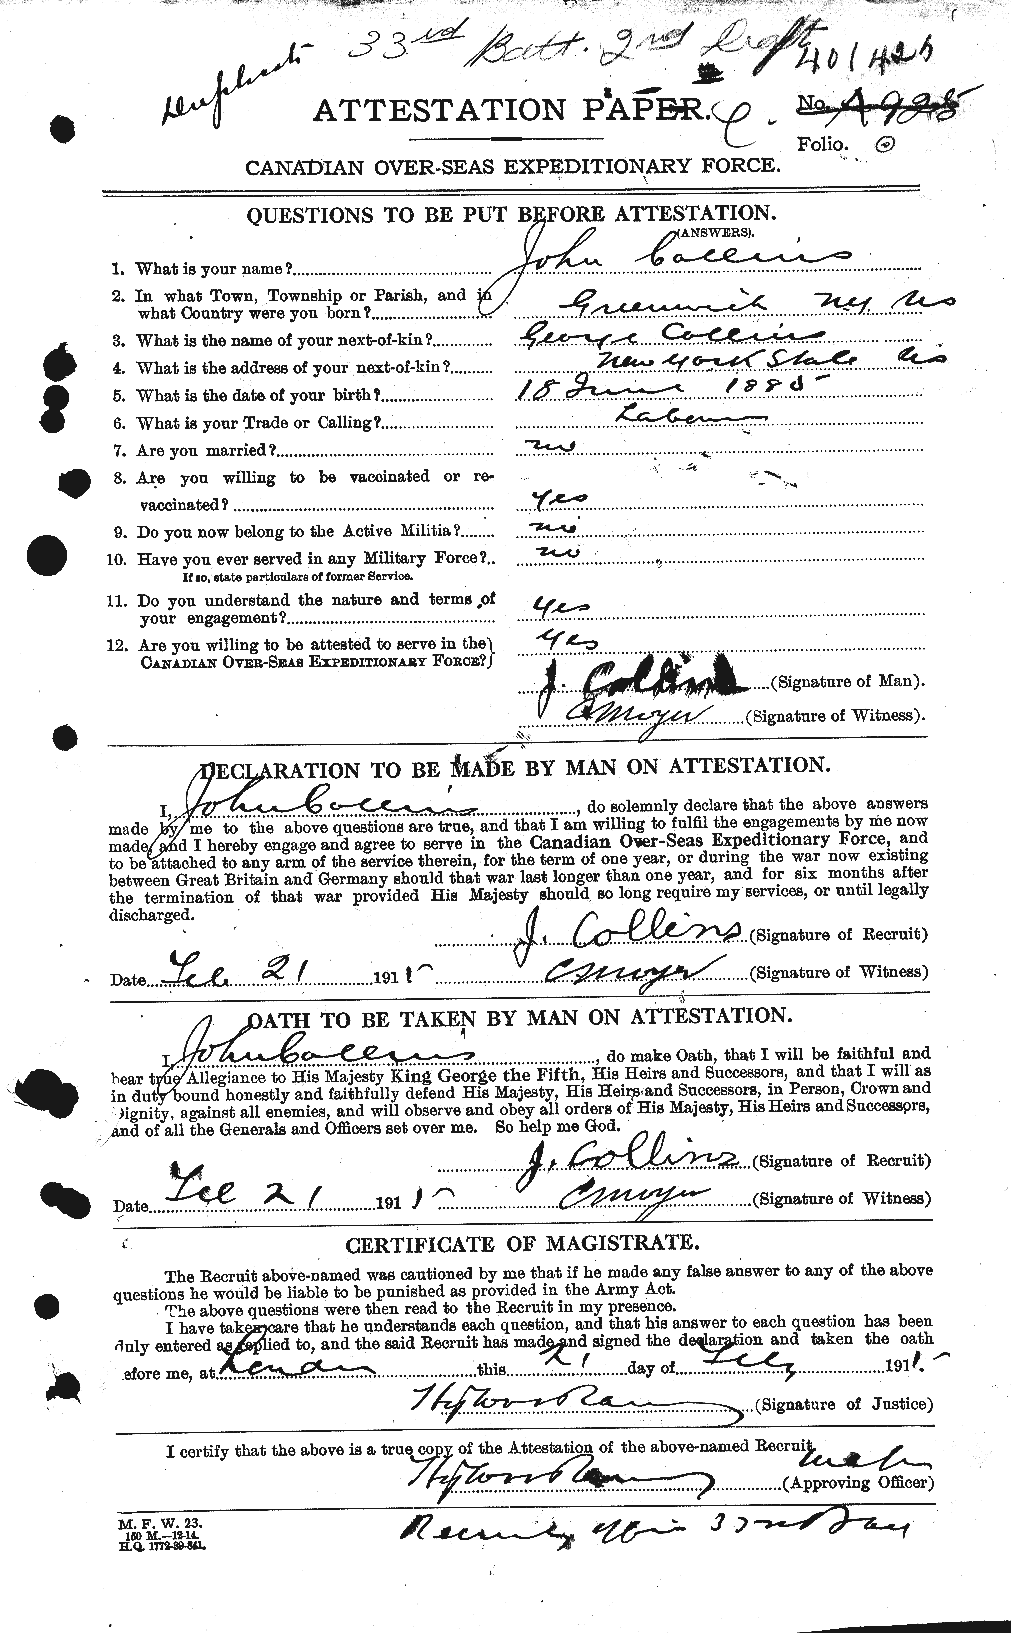 Personnel Records of the First World War - CEF 069812a